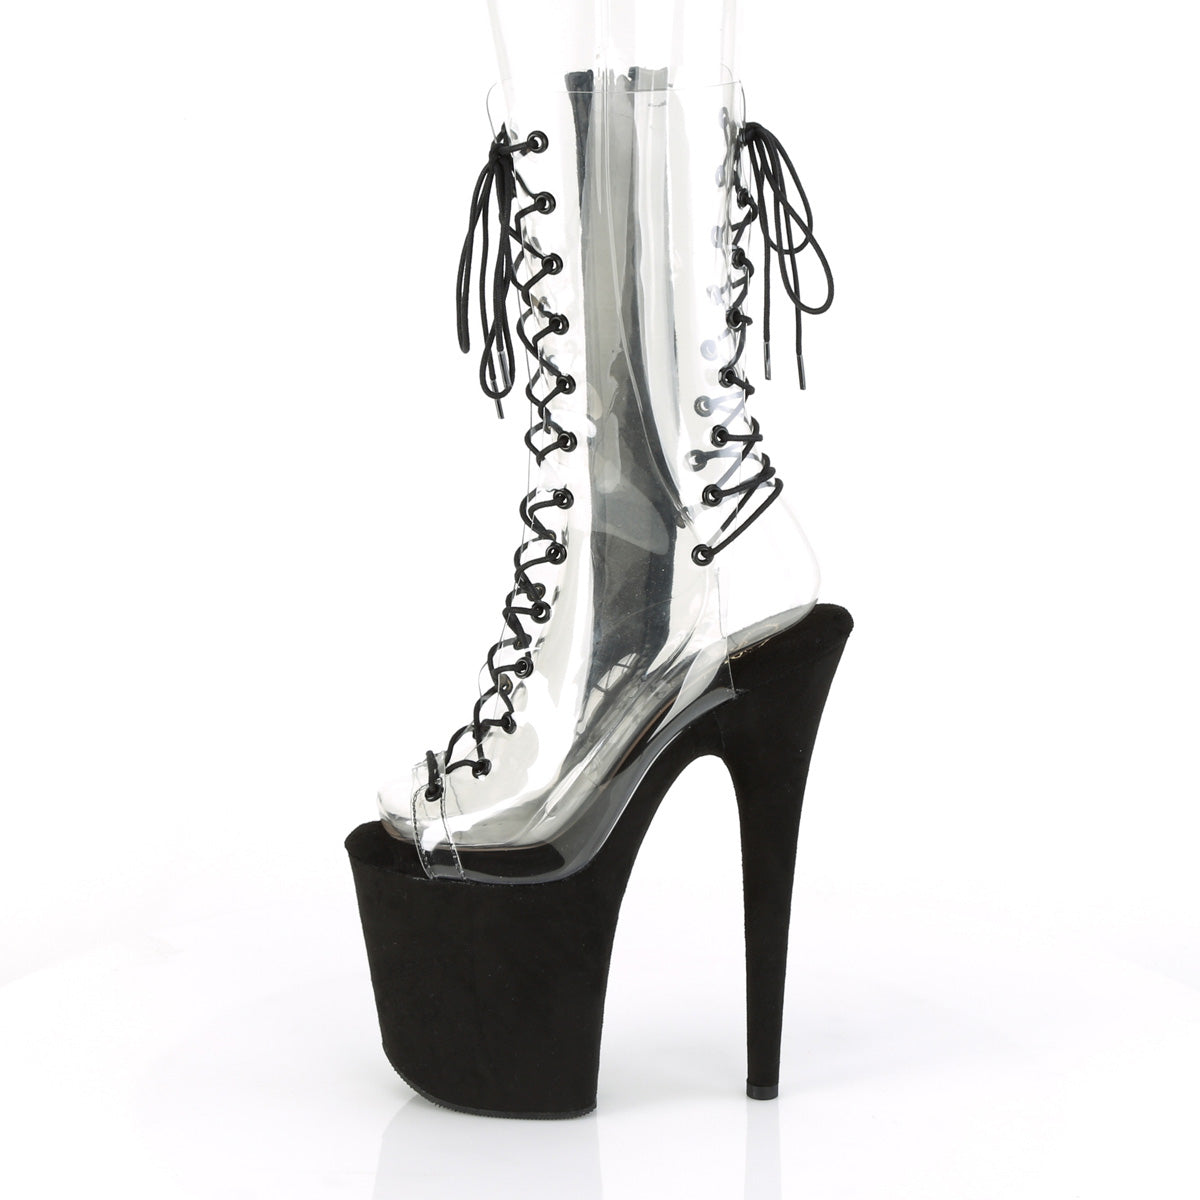 FLAMINGO-800-60FS Pleaser Pole Dancing Shoes Ankle Boots Pleasers - Sexy Shoes Pole Dance Heels